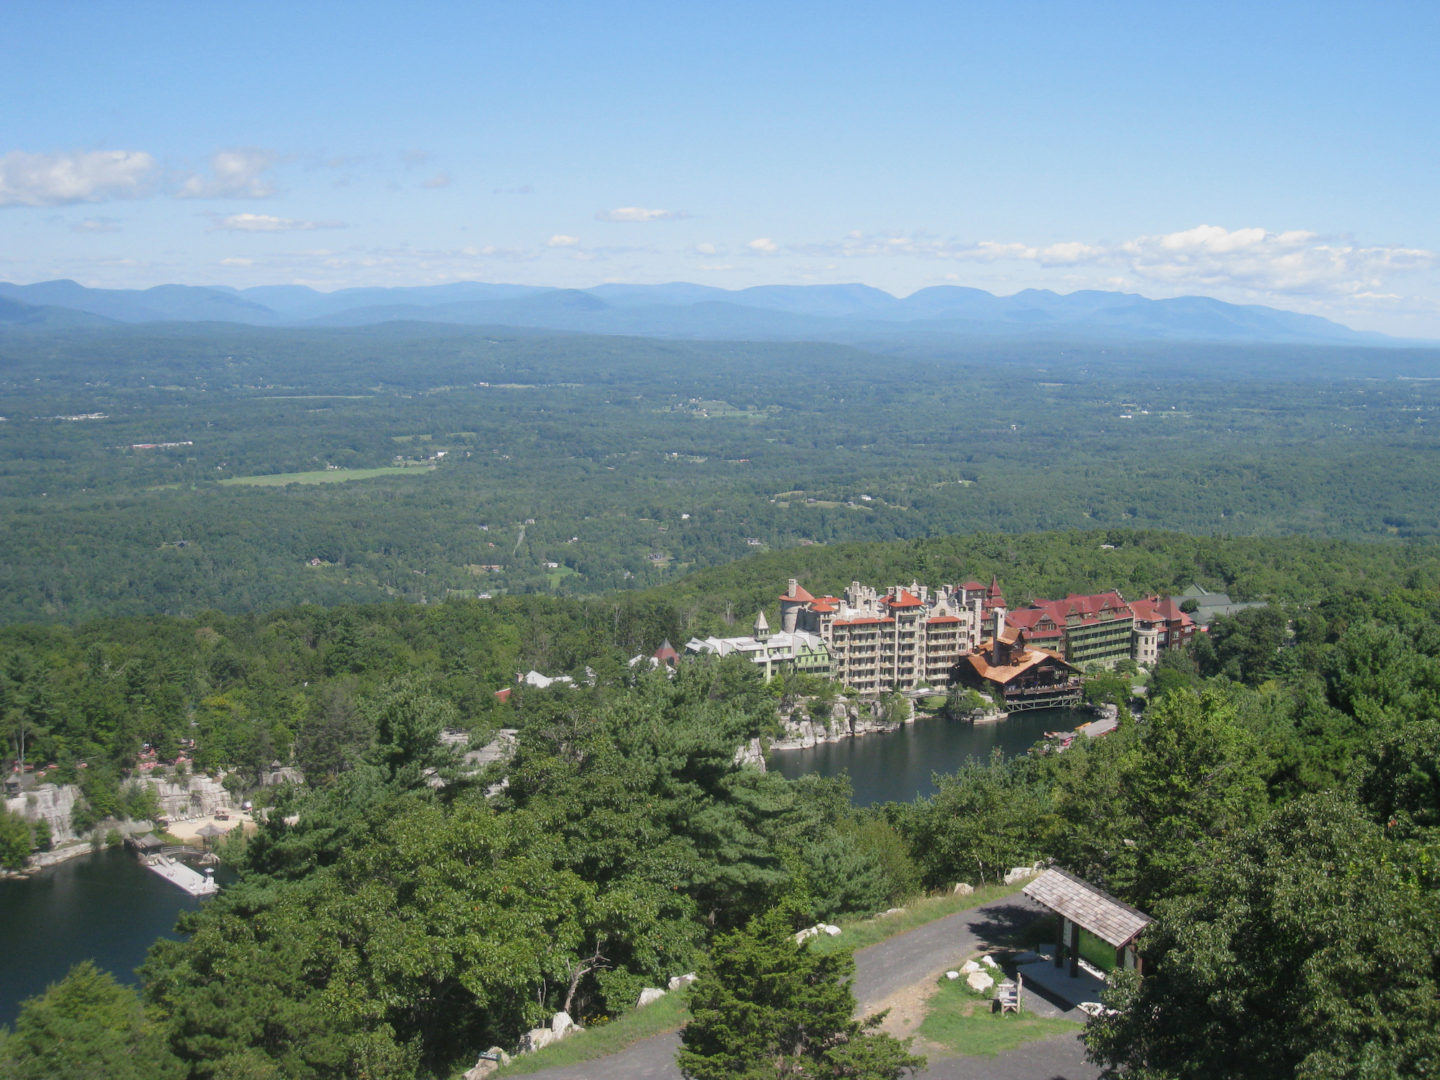 Mohonk Mountain House, 1000 Mountain Rest Rd, New Paltz, NY 12561